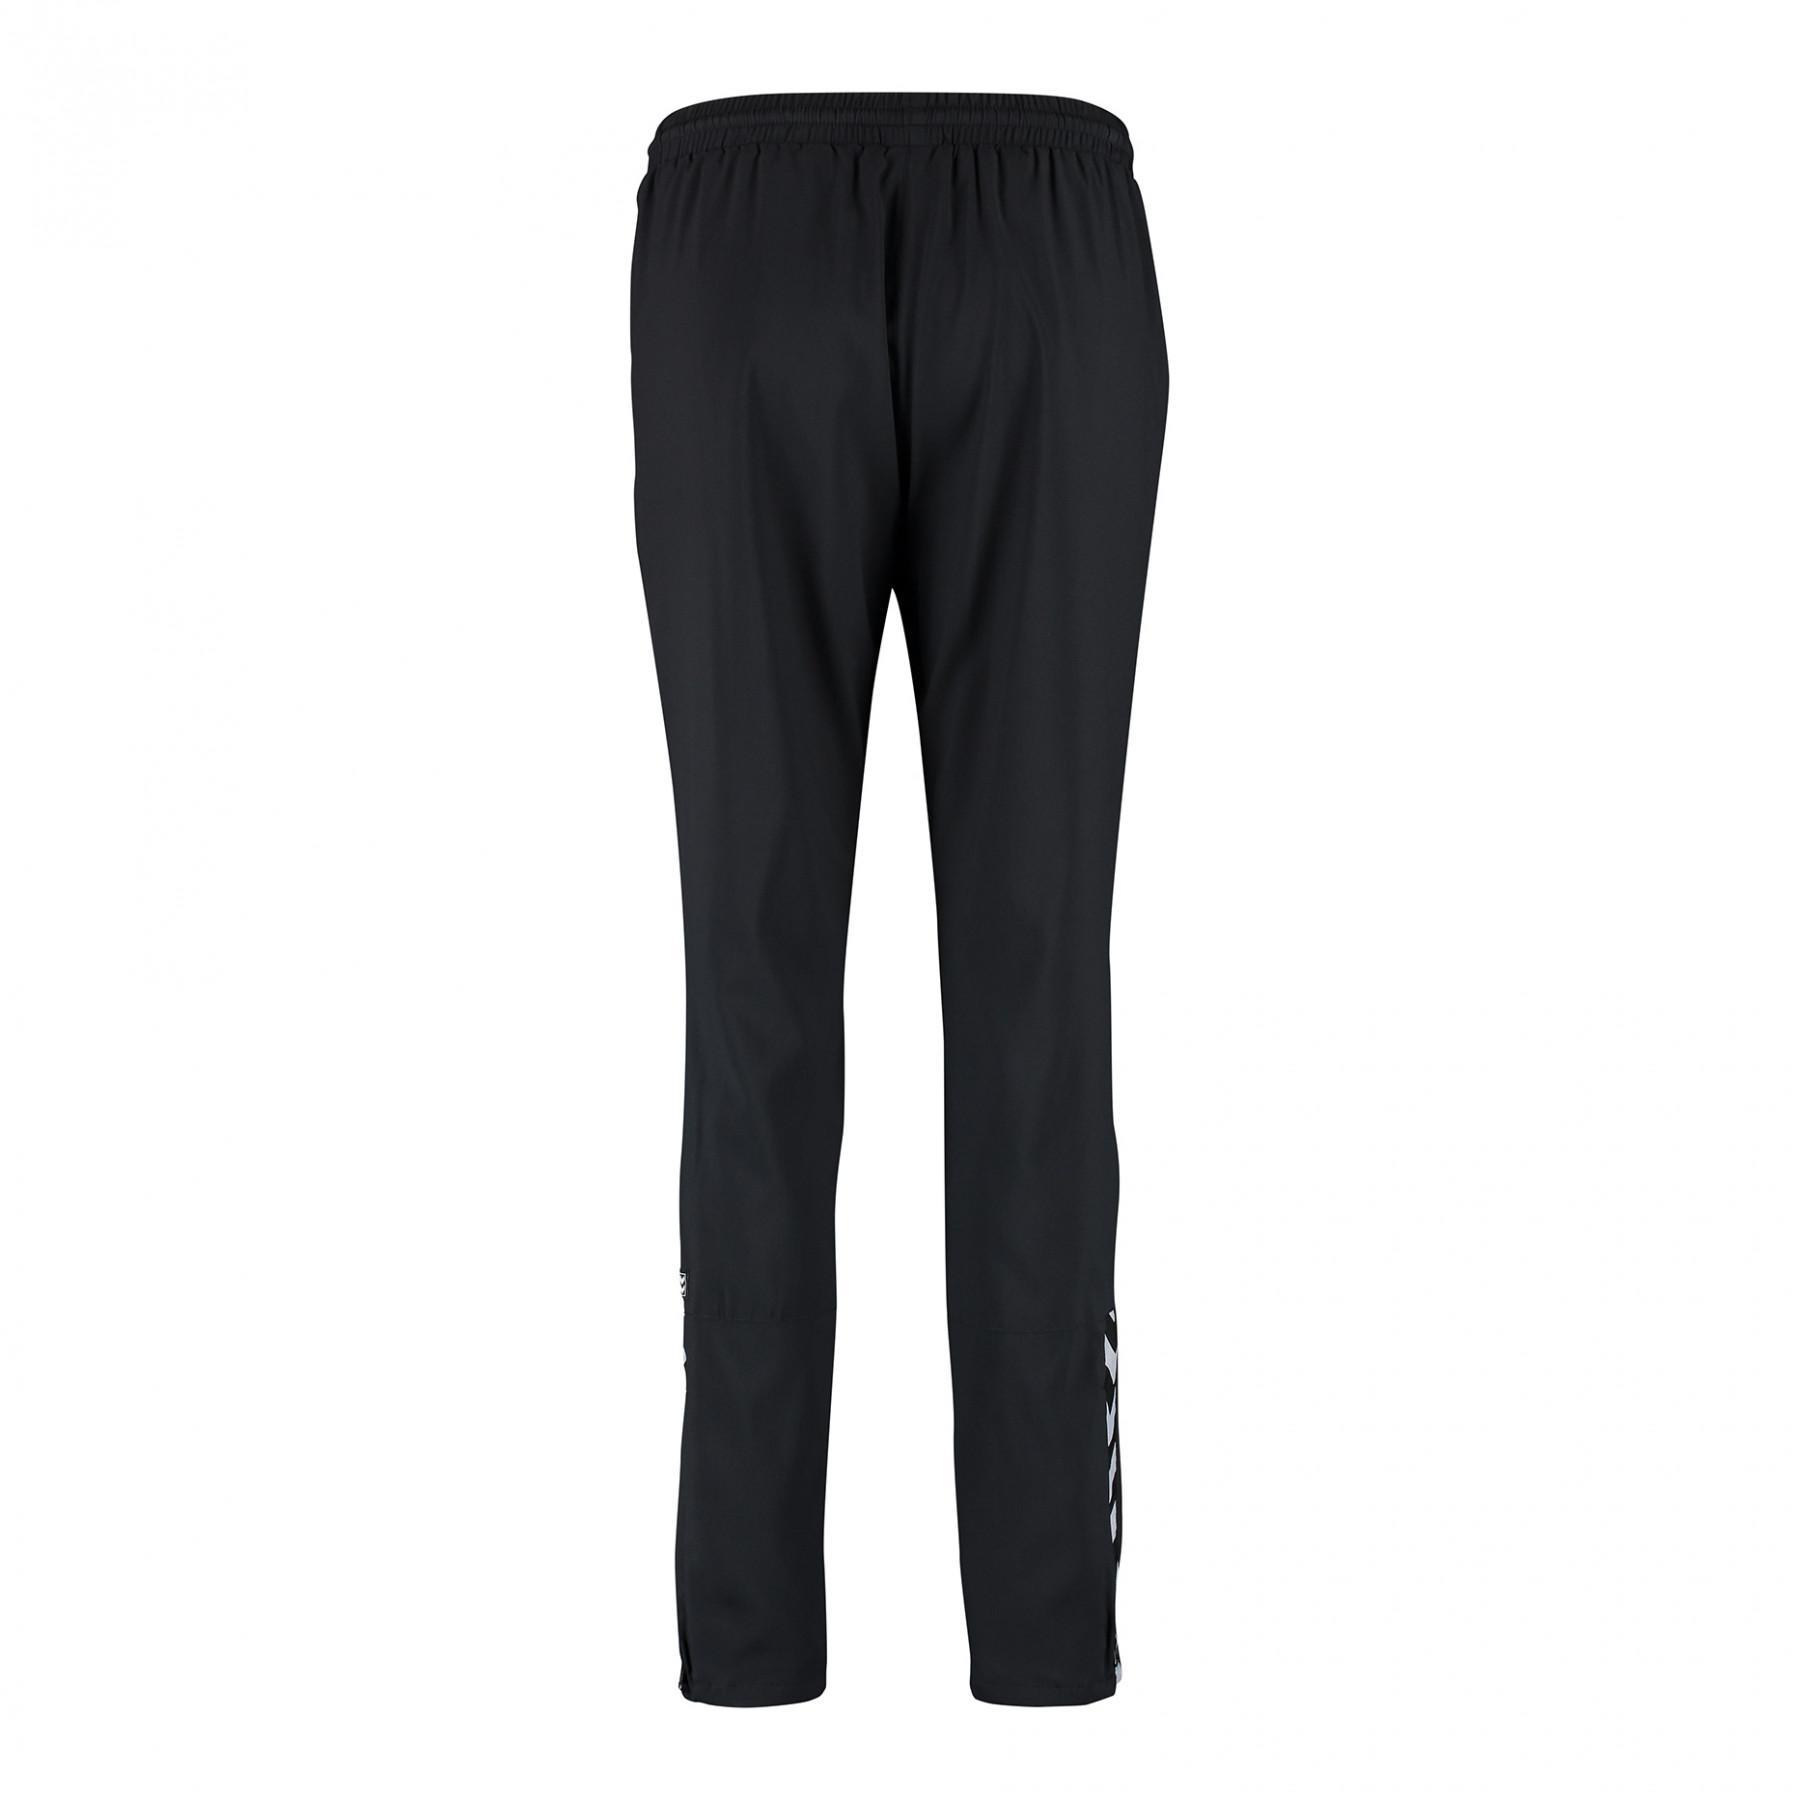 Women's trousers Hummel auth charge micro